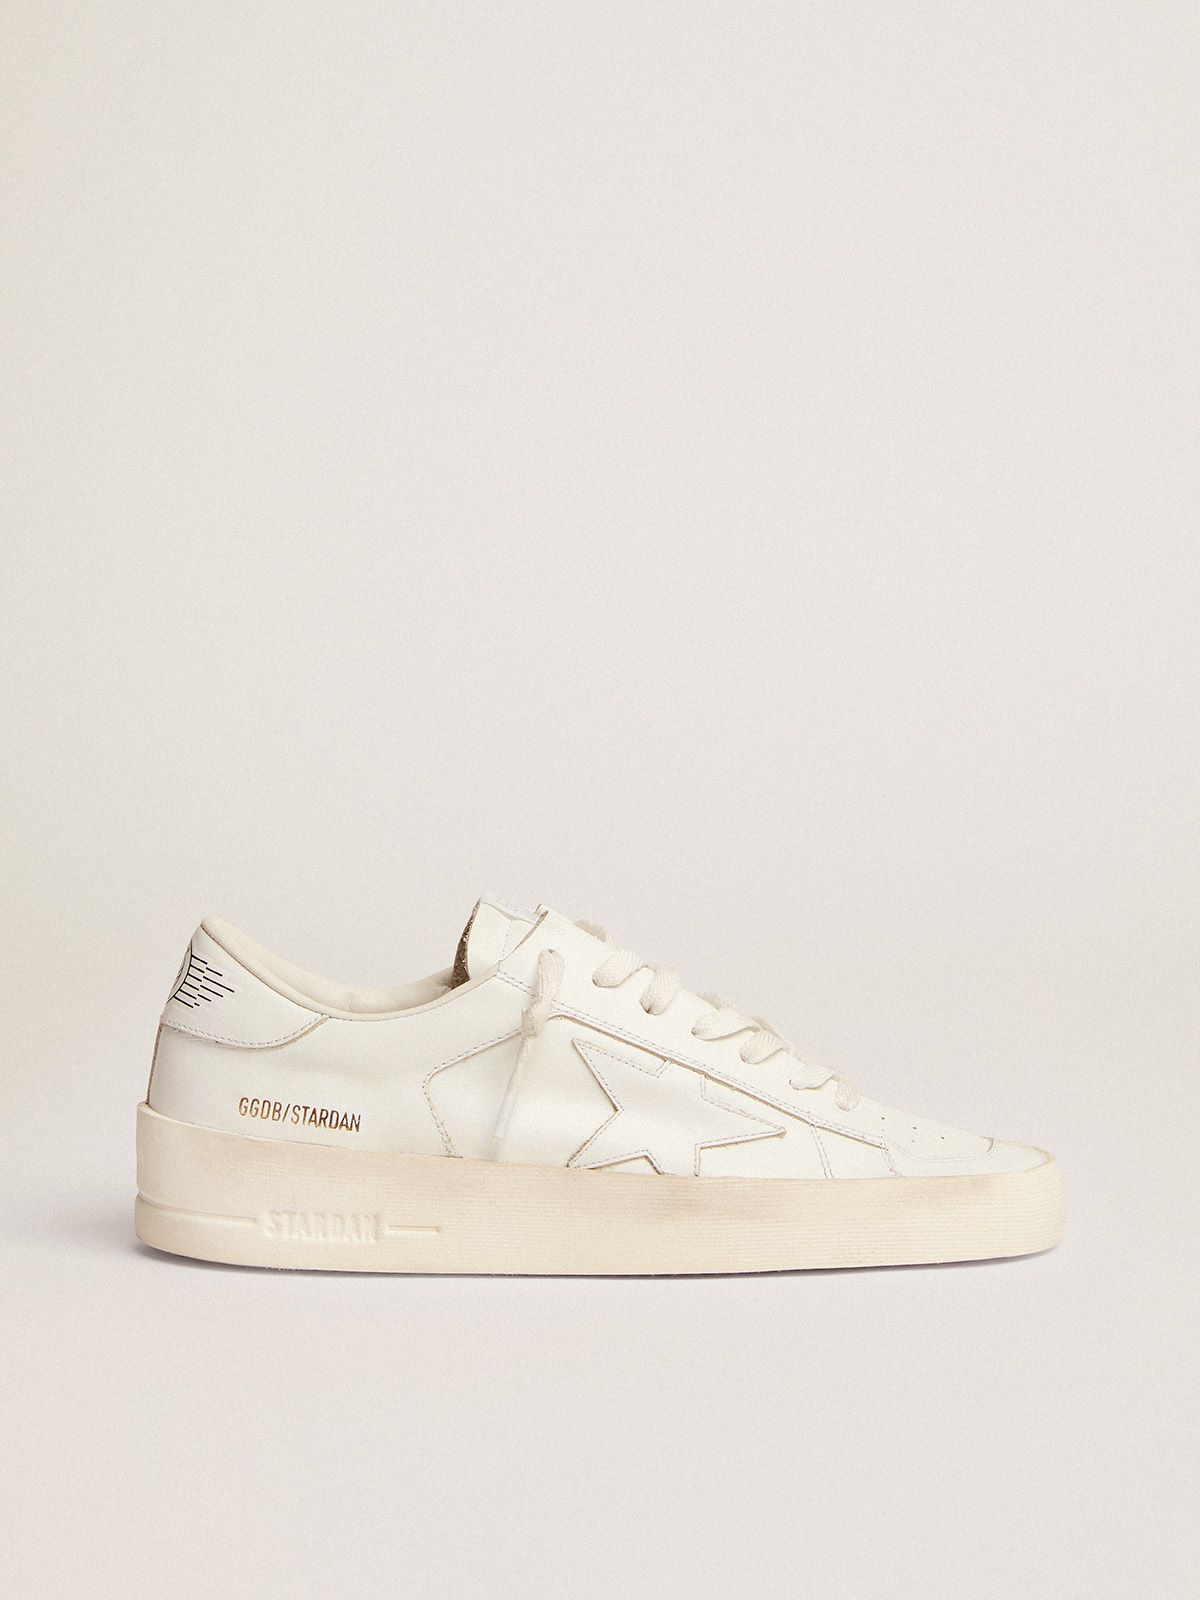 golden goose total in Stardan leather white sneakers